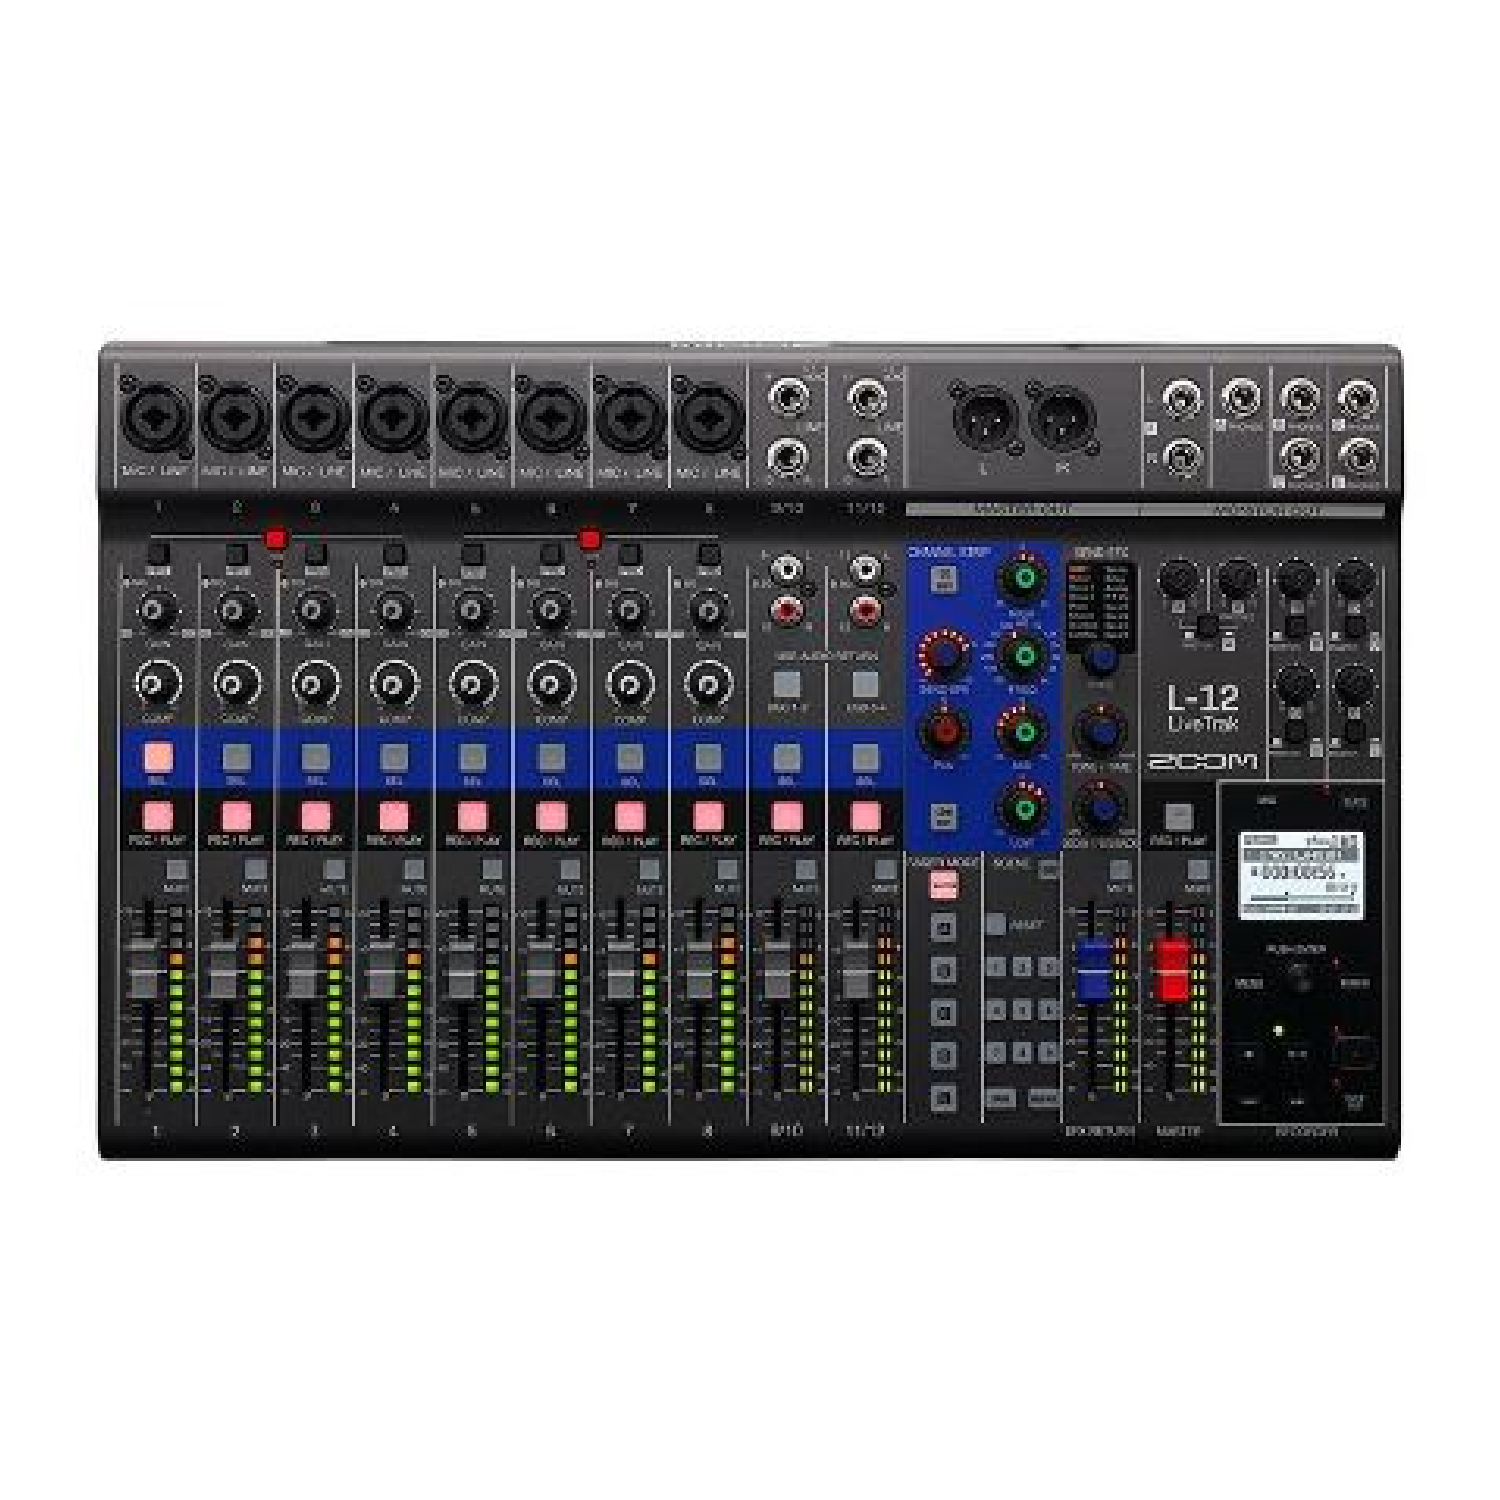 12 Channel Digital Mixer and Multitrack Recorder, Built In 14 Track SD Recorder USB Audio Interface (iOS Compatible), Channel Strip with 3 Band EQ Low-Cut Filter and 16 Digital Effects   L12 zoom